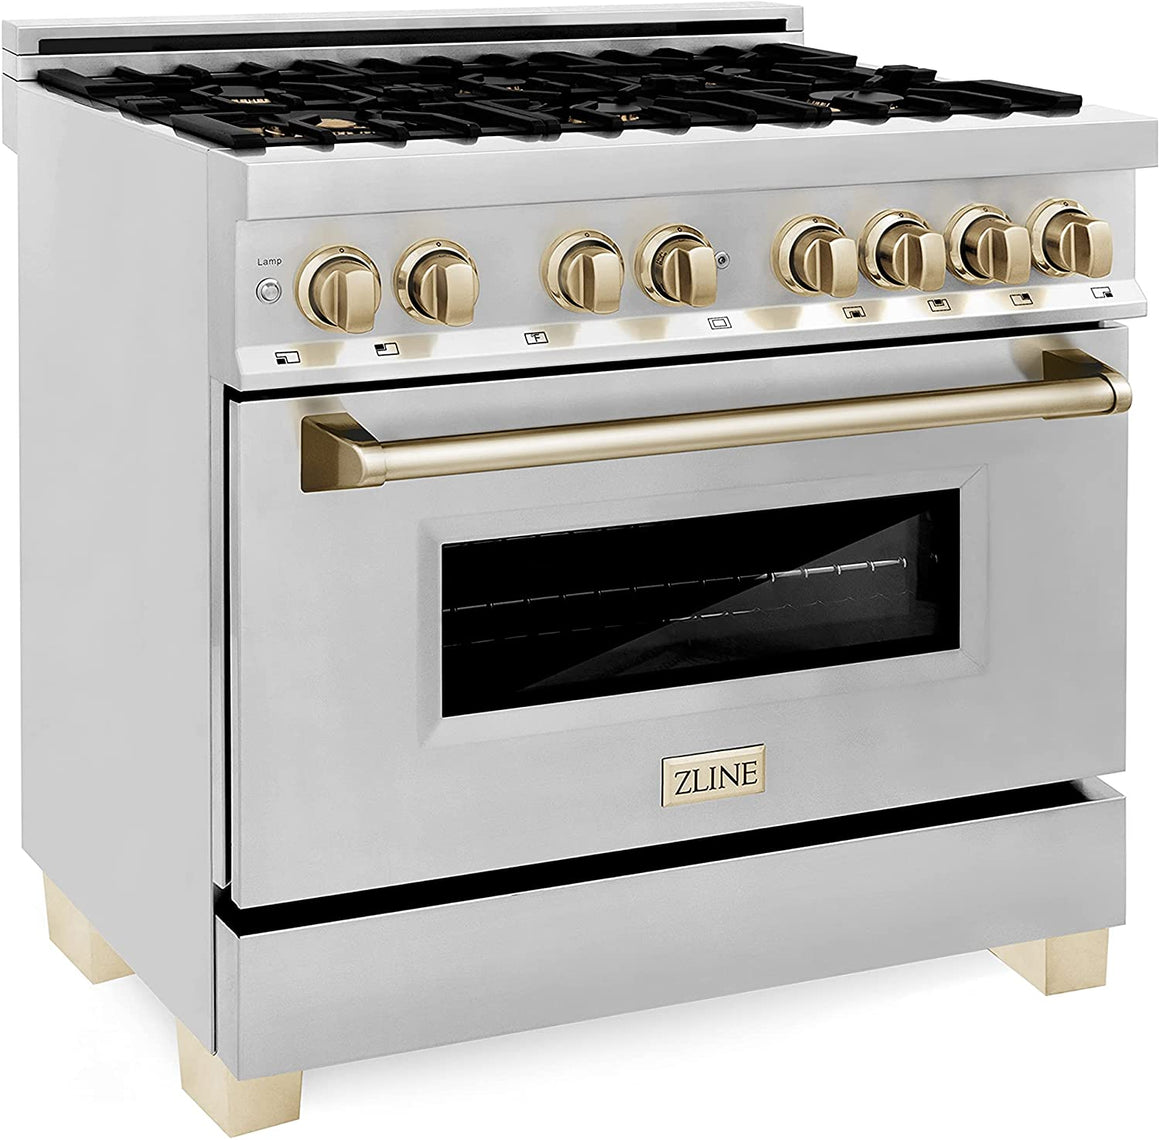 ZLINE Autograph Edition 36" 4.6 cu. ft. Dual Fuel Range with Gas Stove and Electric Oven in Stainless Steel with Gold Accents (RAZ-36-G)